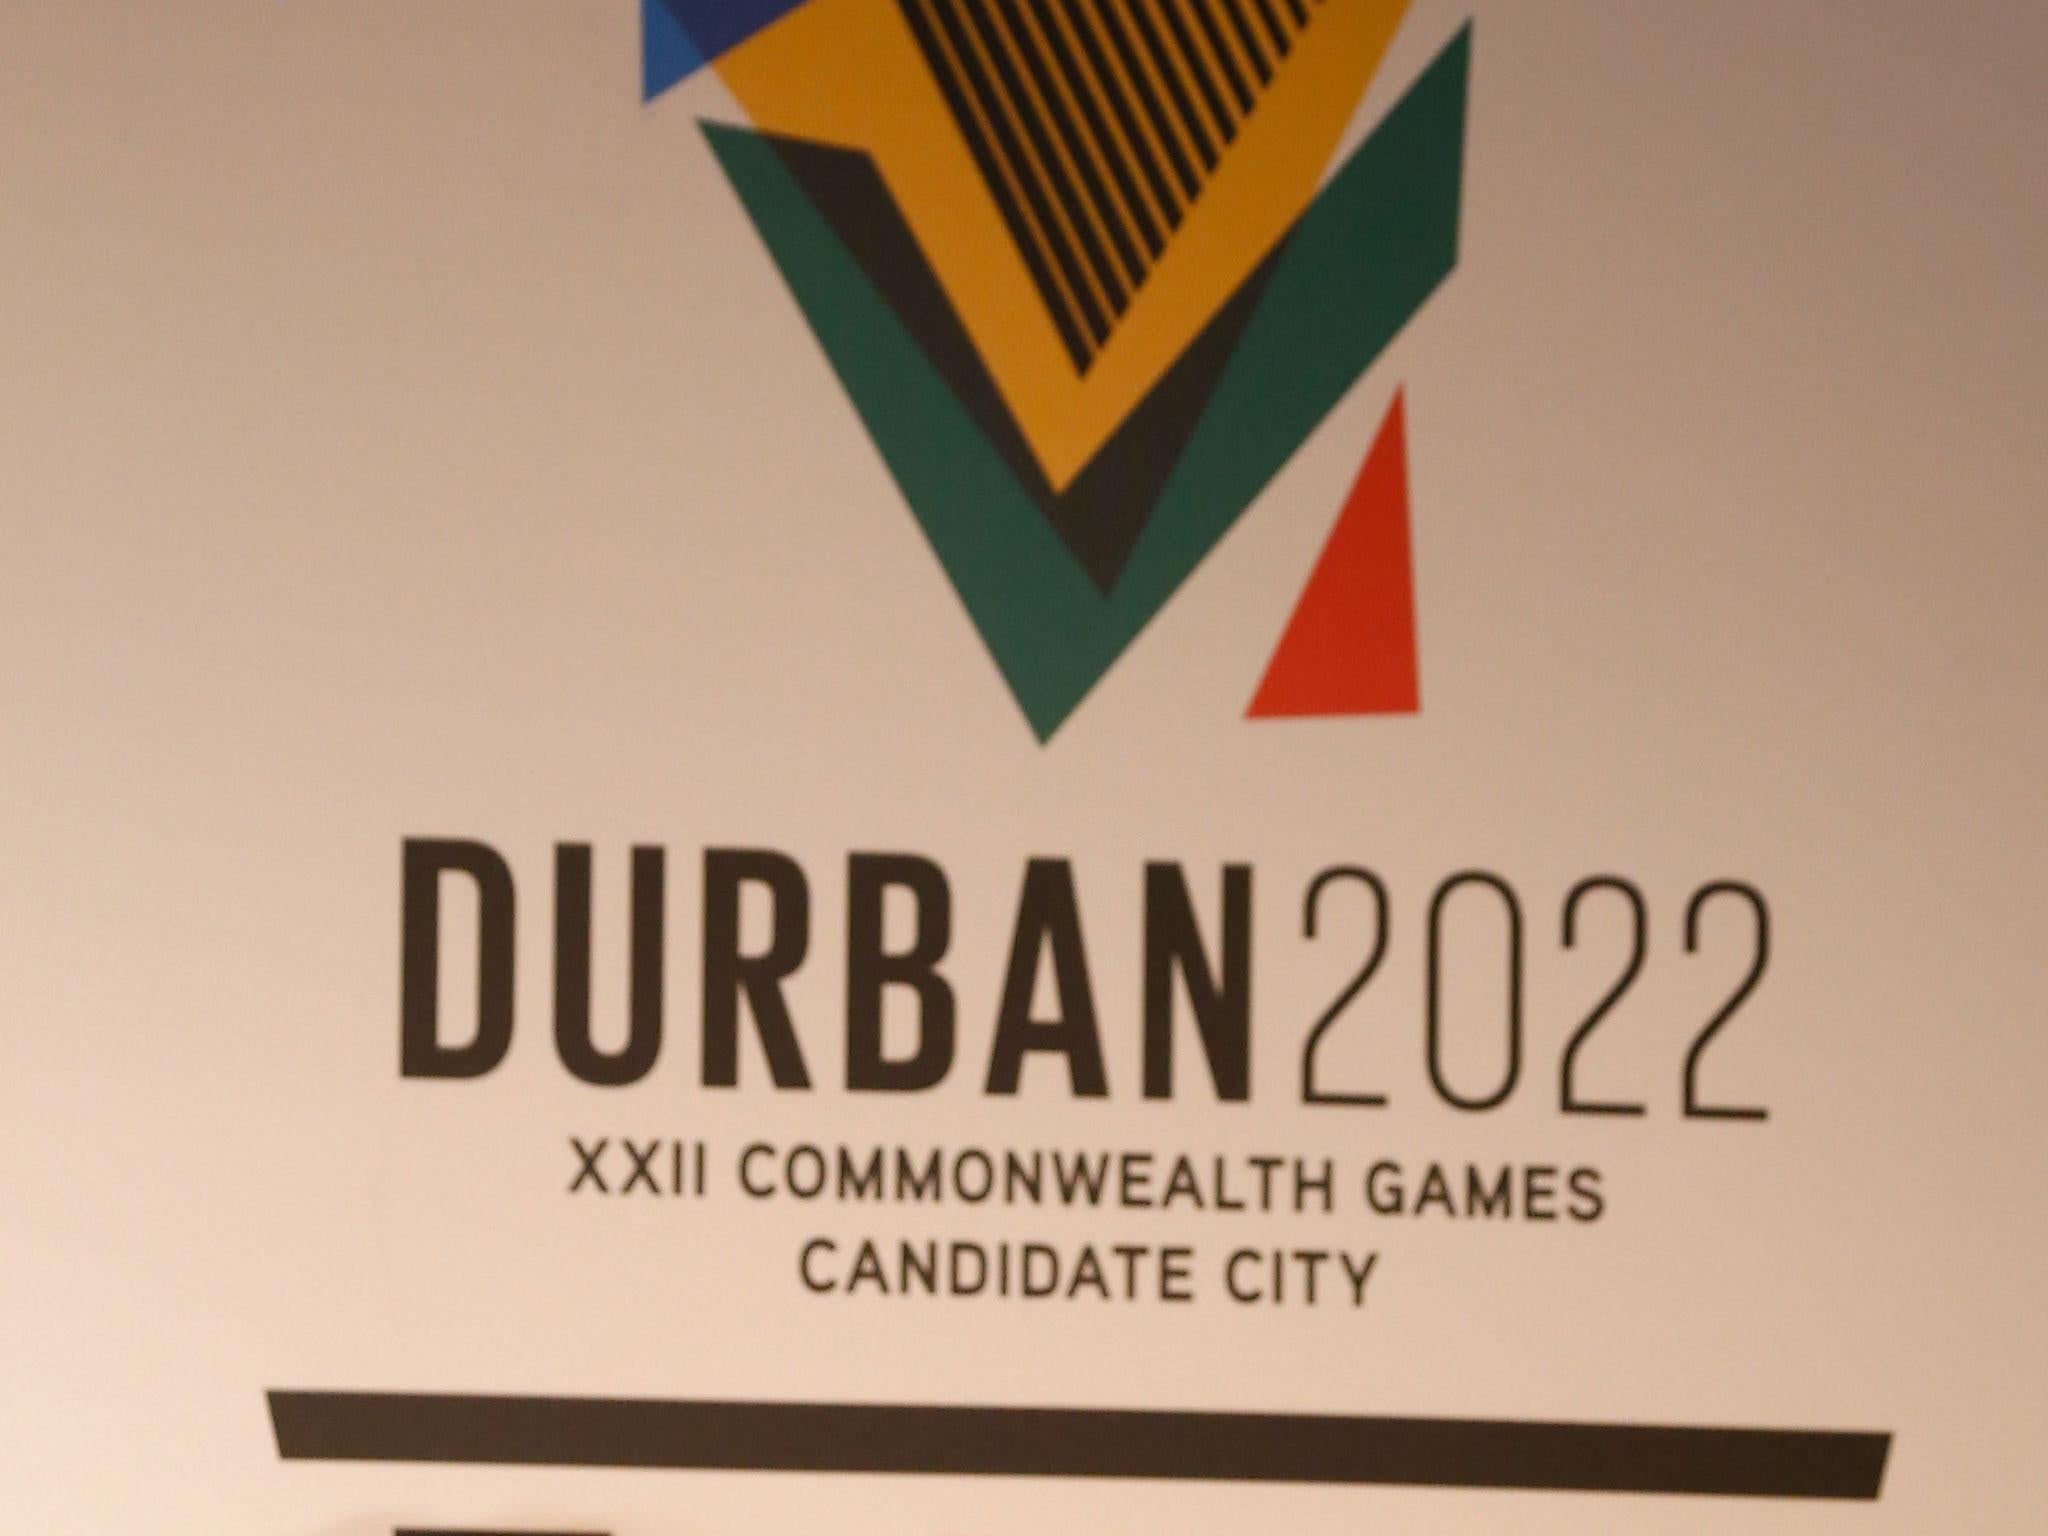 The South African city of Durban has been all but stripped of its rights to host the 2022 Games